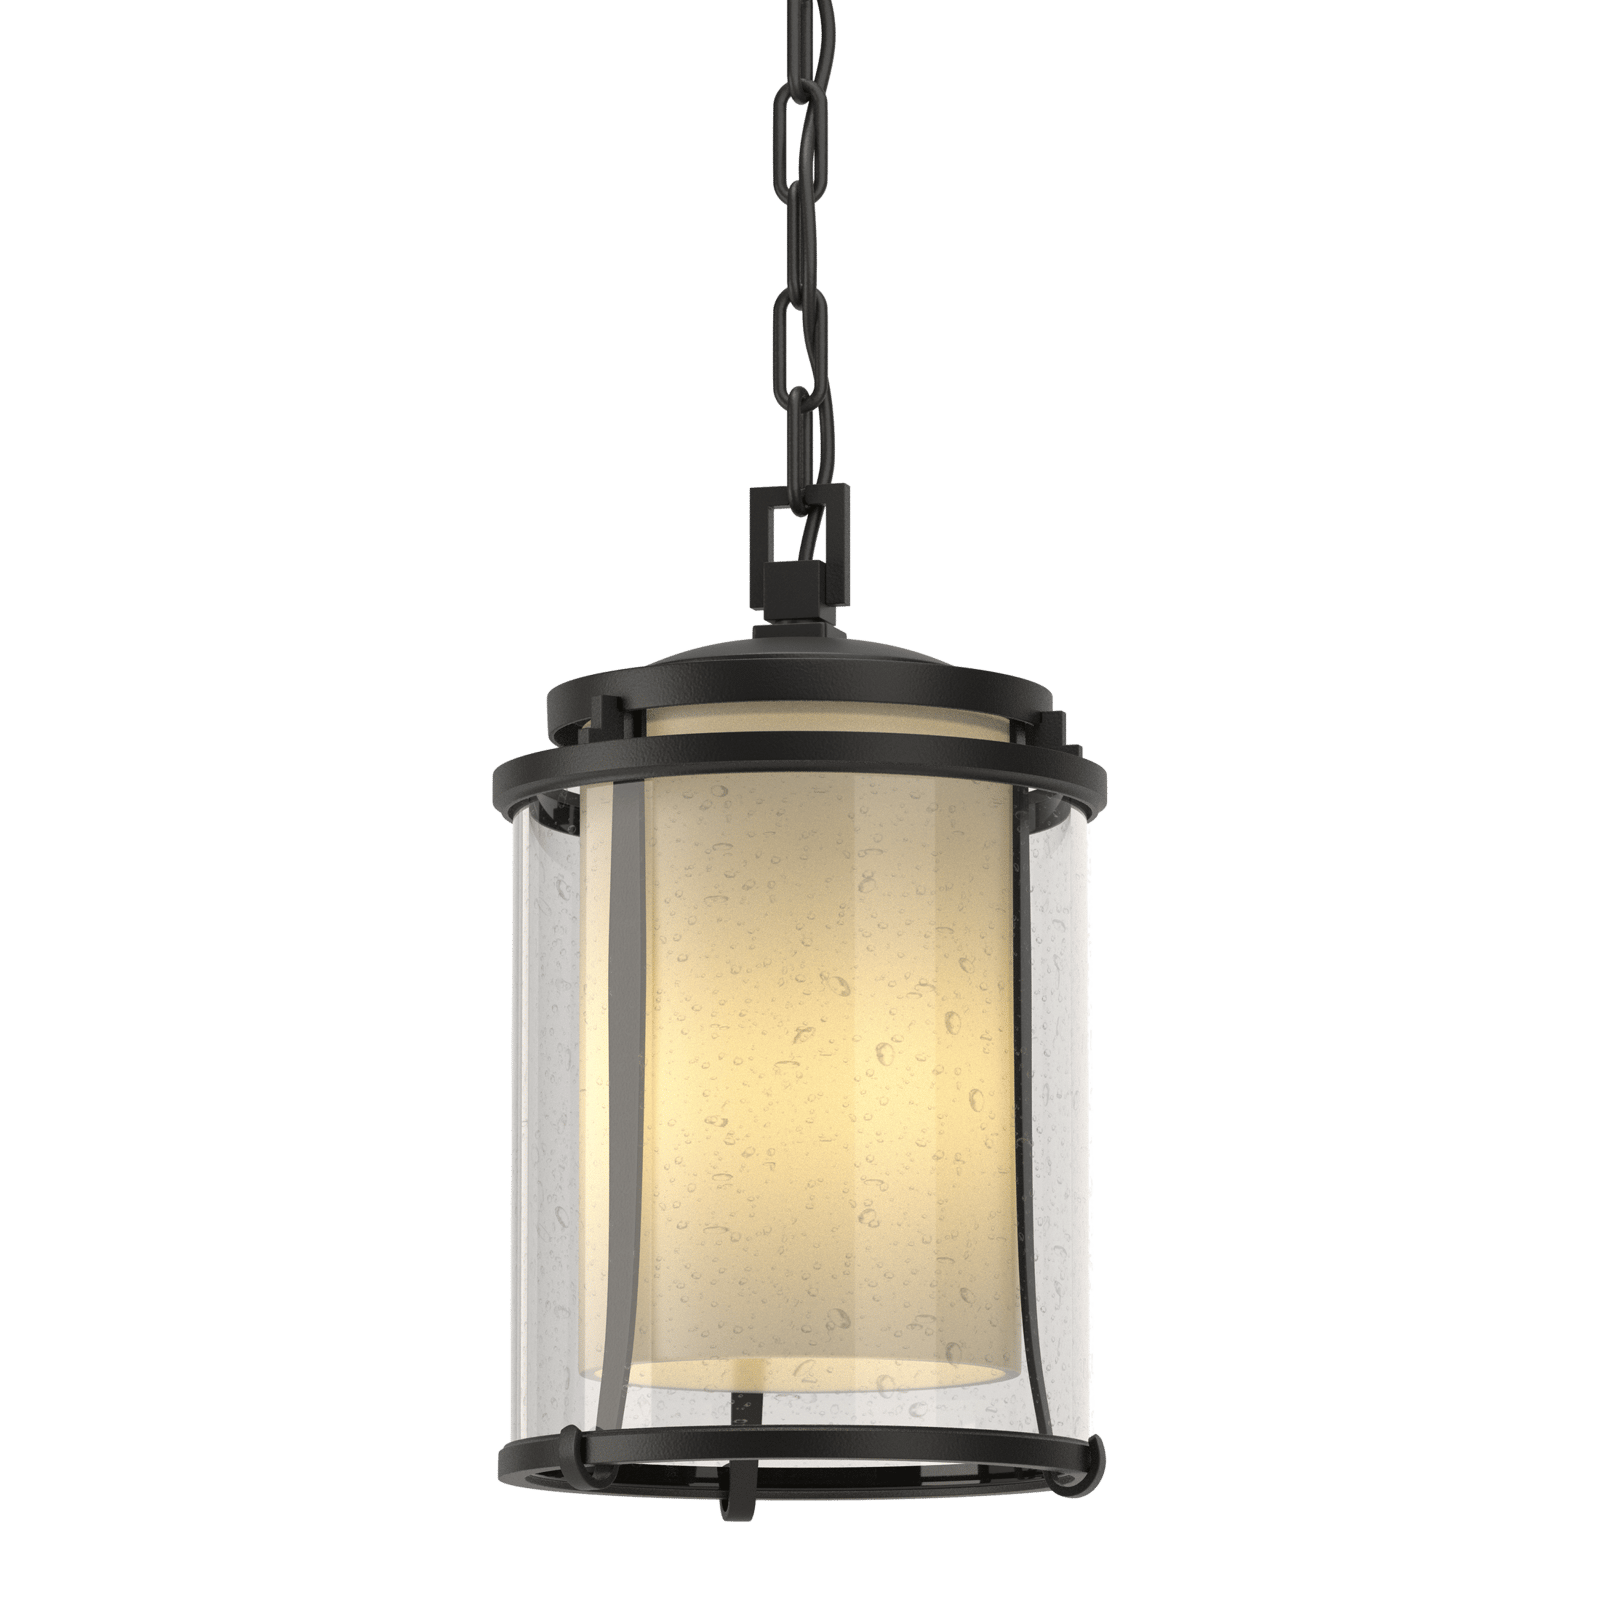 Hubbardton Forge Meridian Outdoor Ceiling Fixture Outdoor l Wall Hubbardton Forge Coastal Black Seeded Glass with Opal Diffuser (ZS) 